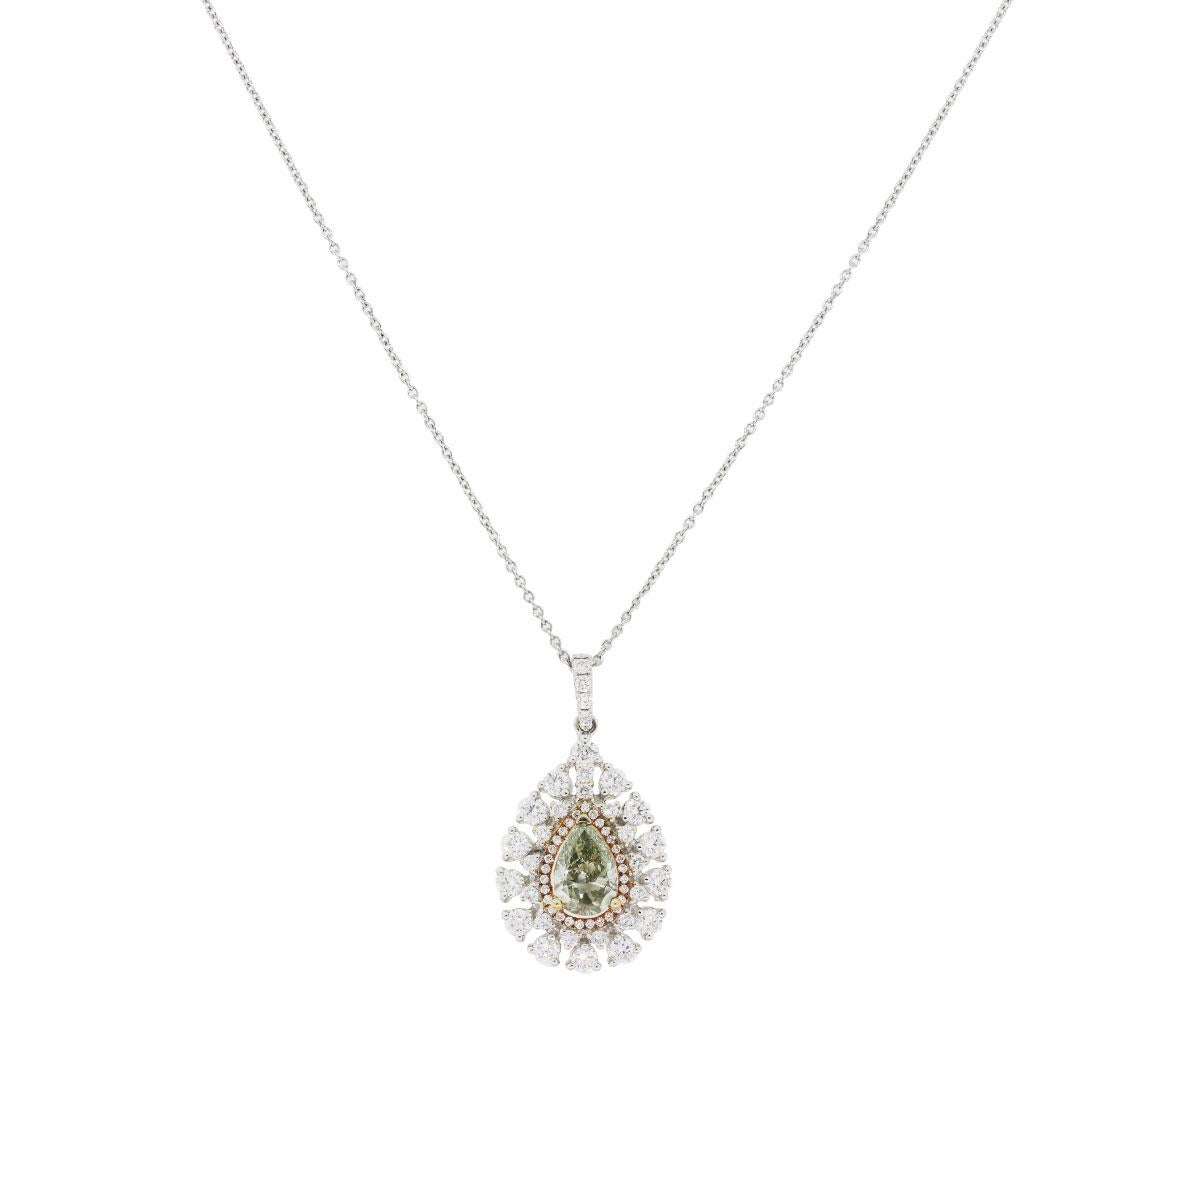 Material: 18k white gold
Main Diamond Details: GIA certified 1.75ct pear shape diamond. Diamond color is fancy gray yellow green, diamond clarity is SI2.                  
                                      GIA #2161962533
Additional Diamond